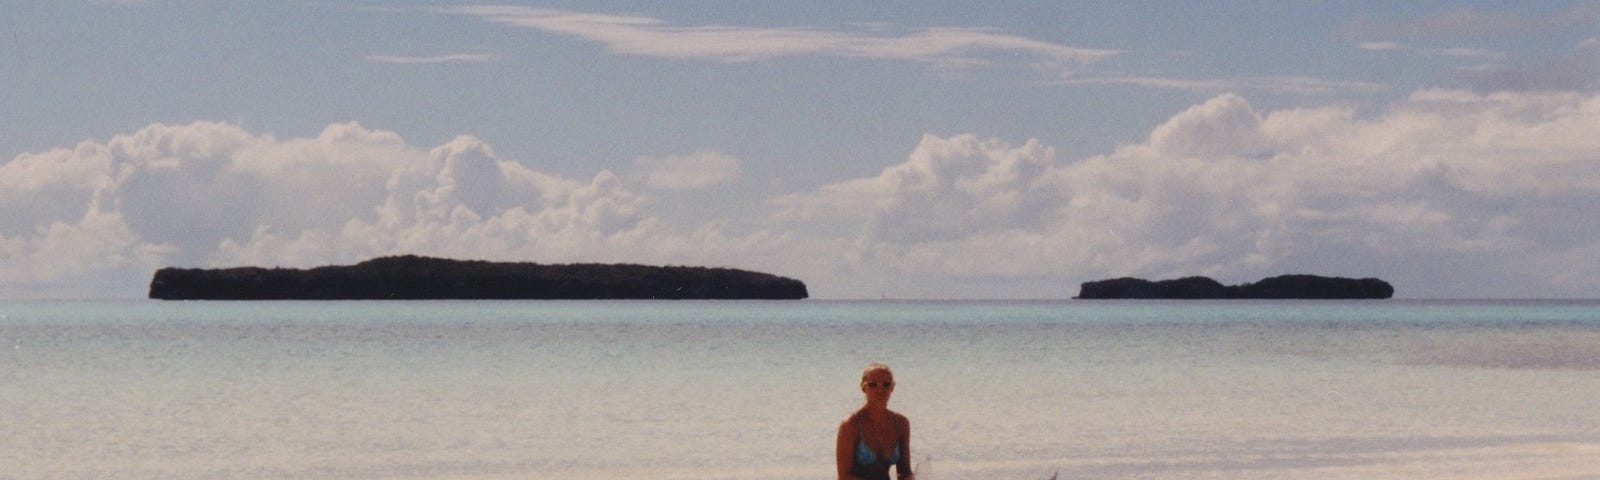 Me sitting on my tandem kayak on the beach with turquoise waters in the background and 2 small islands.